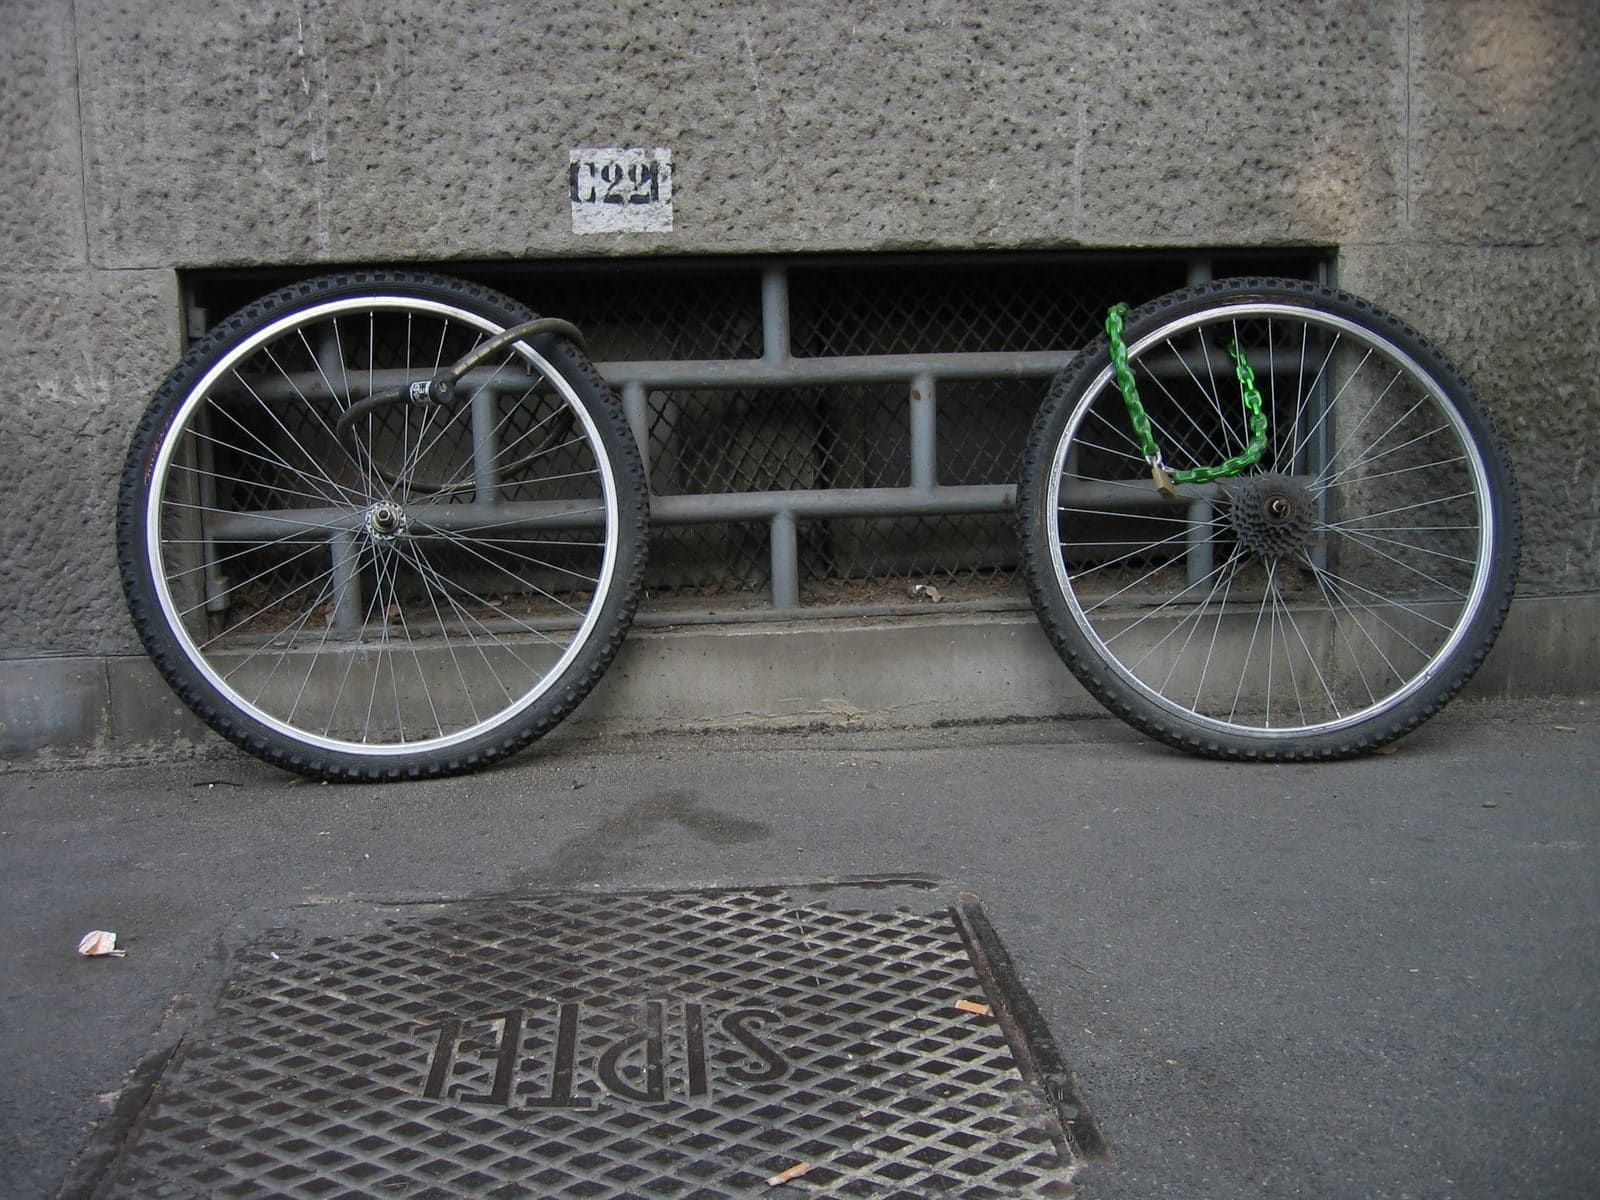 « Locking the frame you get the wheels stolen, locking the wheels you get your frame stolen. » (Photo M. Aquila / FlickR / cc)